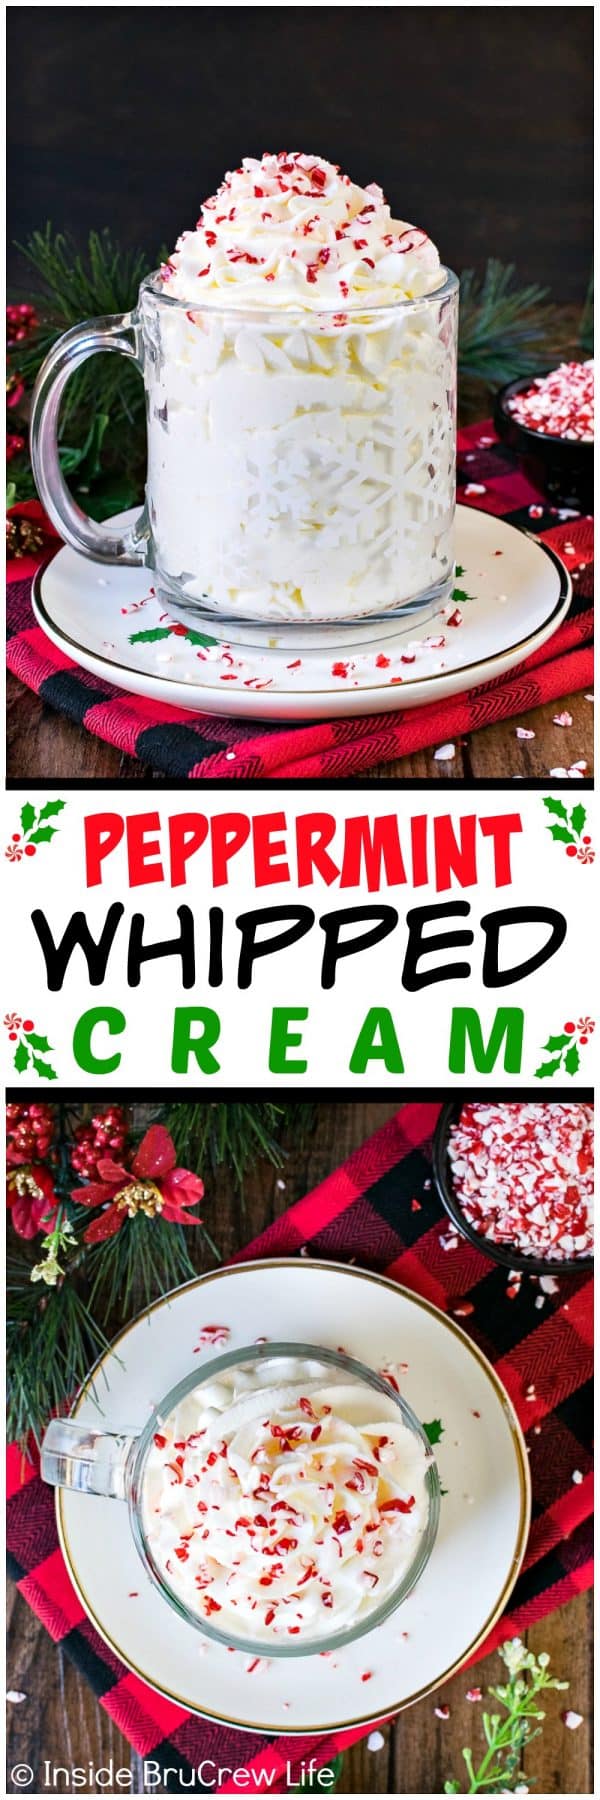 Peppermint Whipped Cream - this creamy homemade topping adds so much fun and flavor to Christmas desserts. Great recipe for holiday parties!